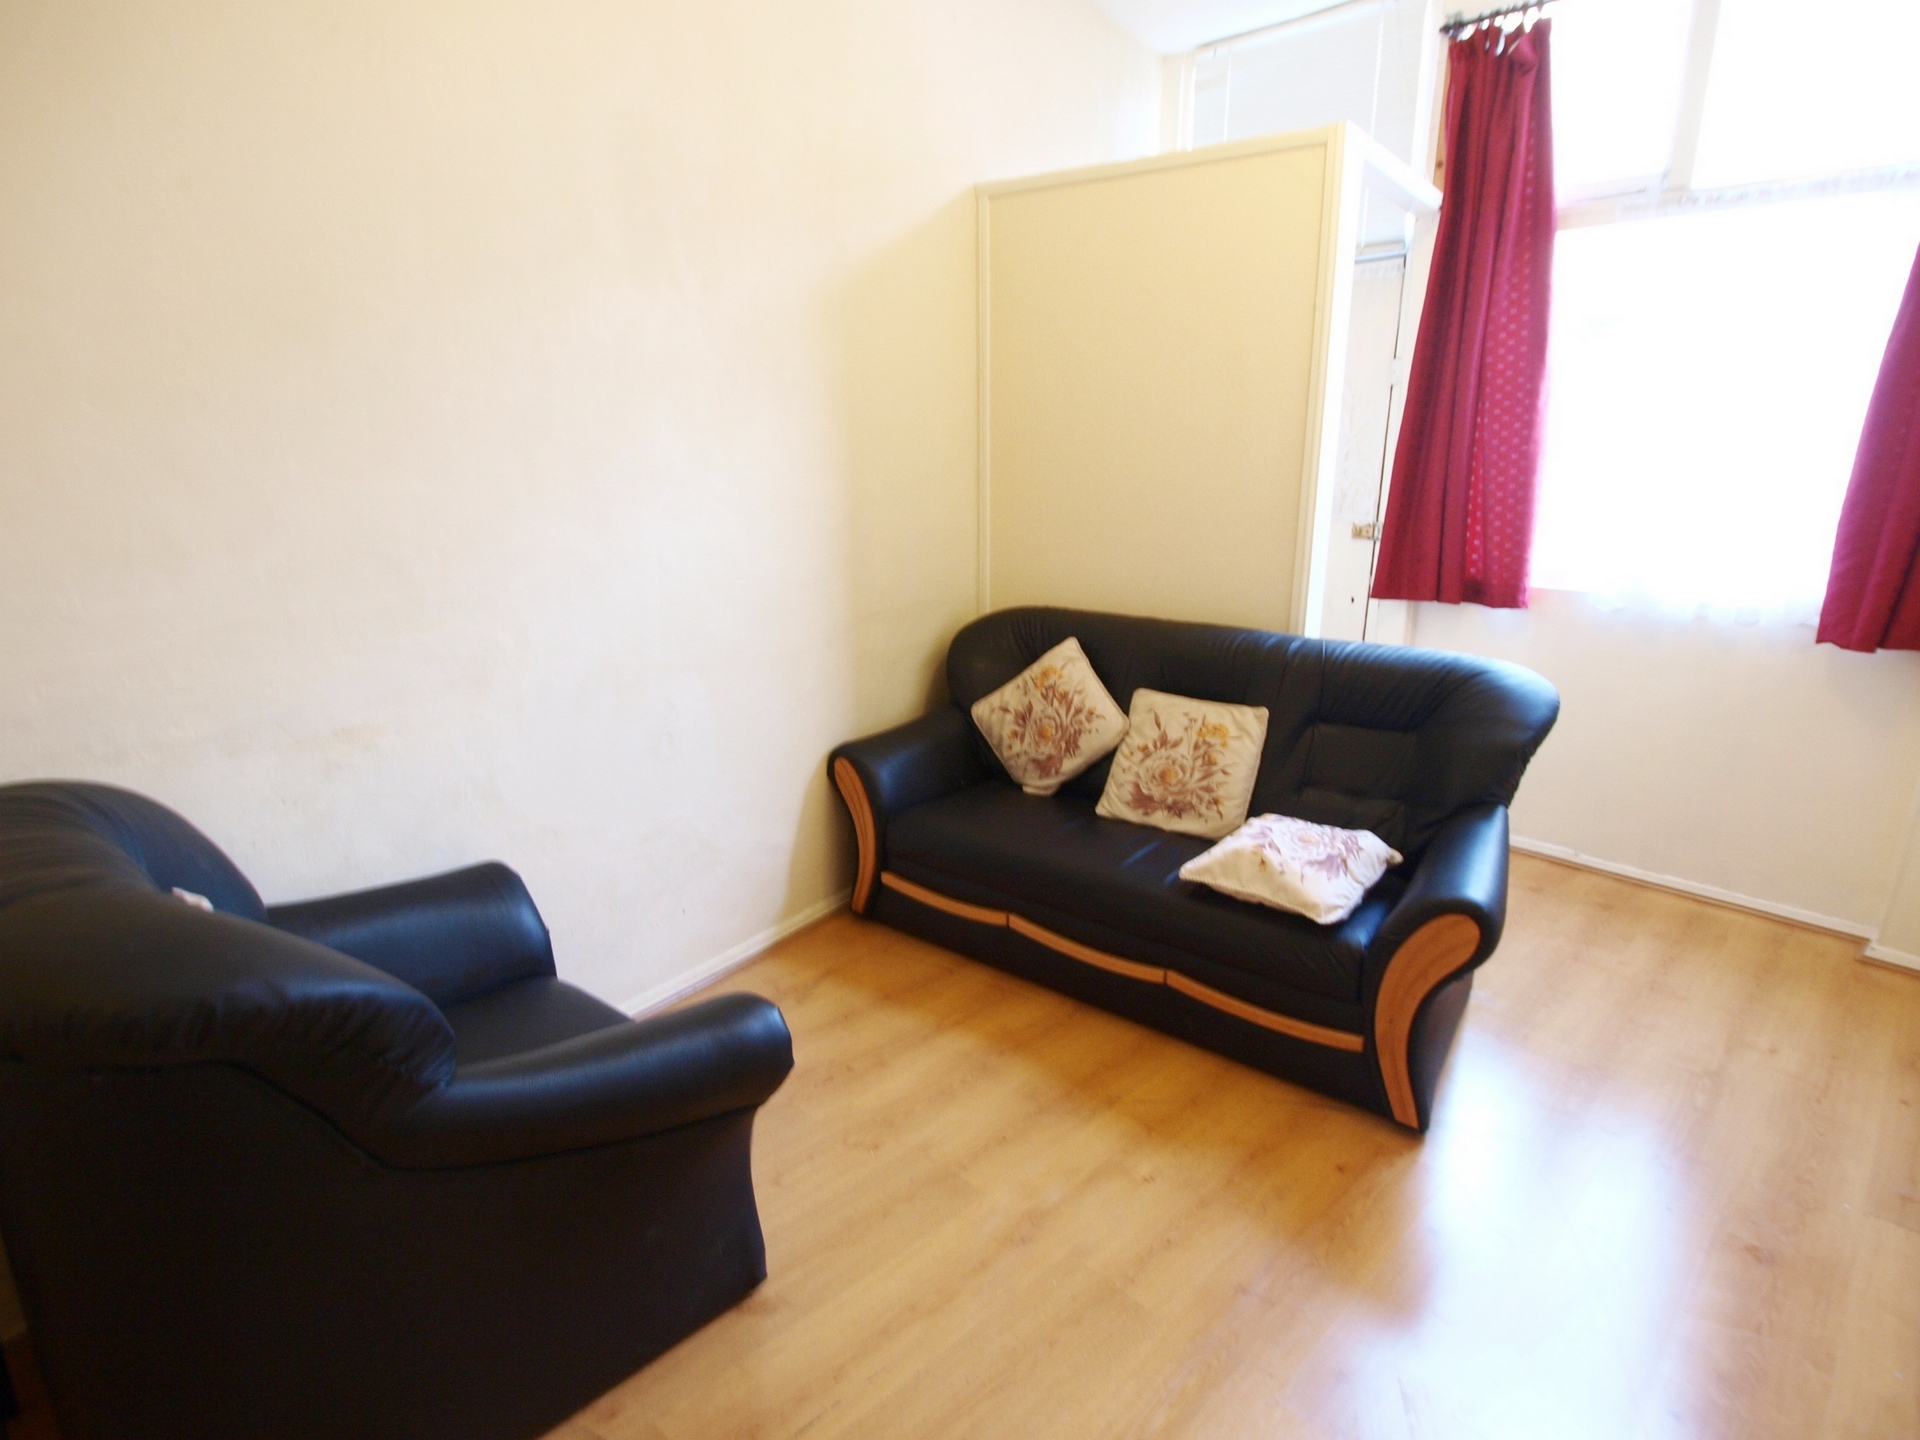 1 Bedroom Flat to rent in Archway, London, N19